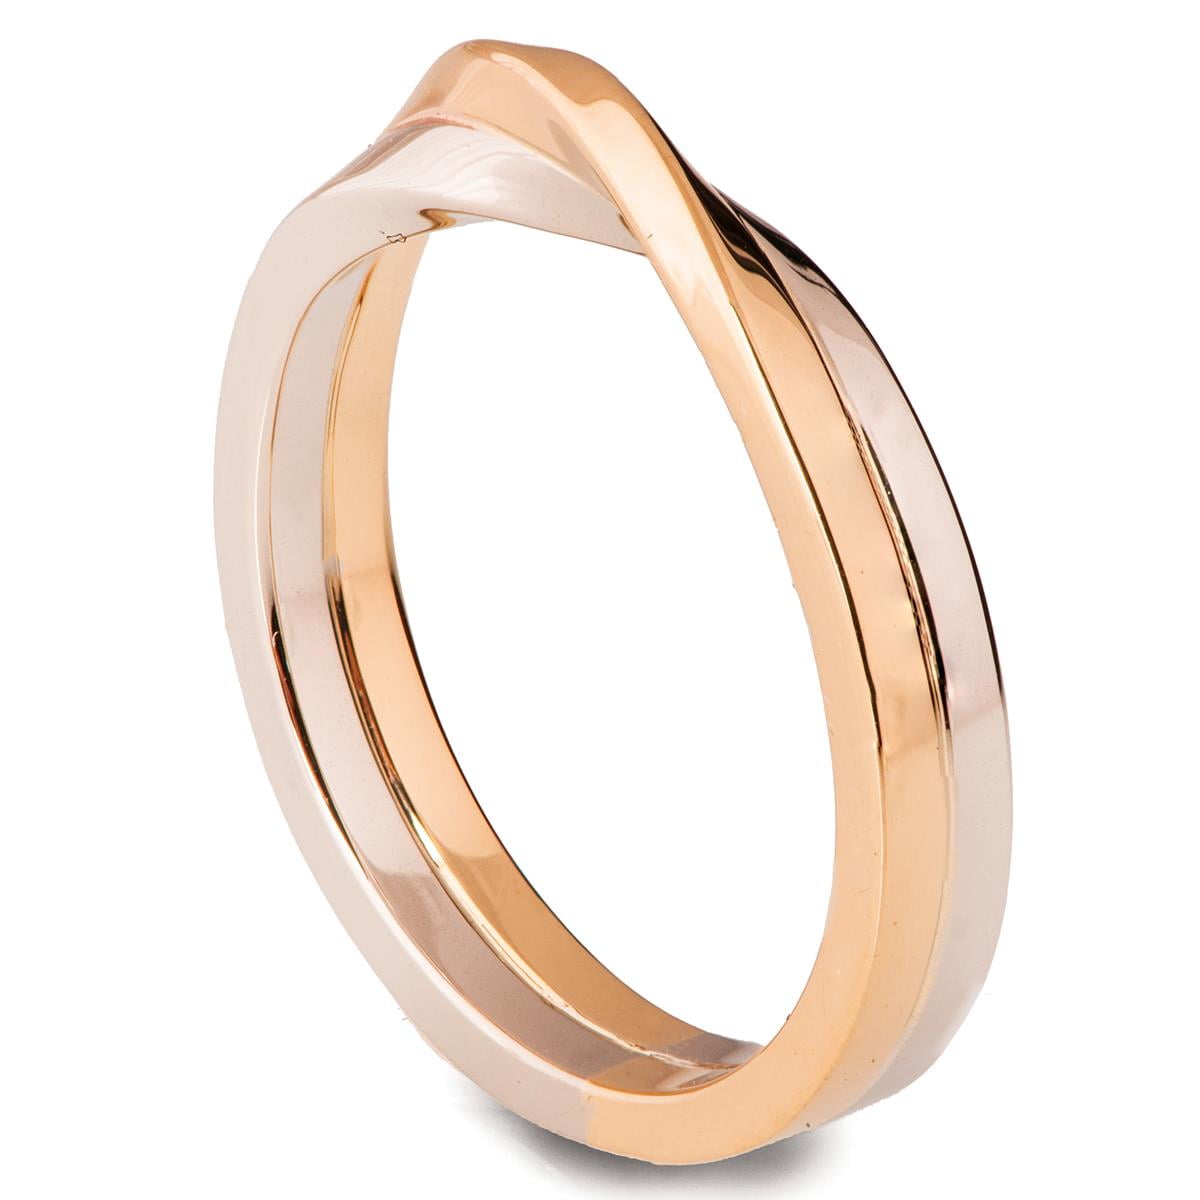 Two Toned Mobius Wedding Band White and Rose Gold - Doron Merav